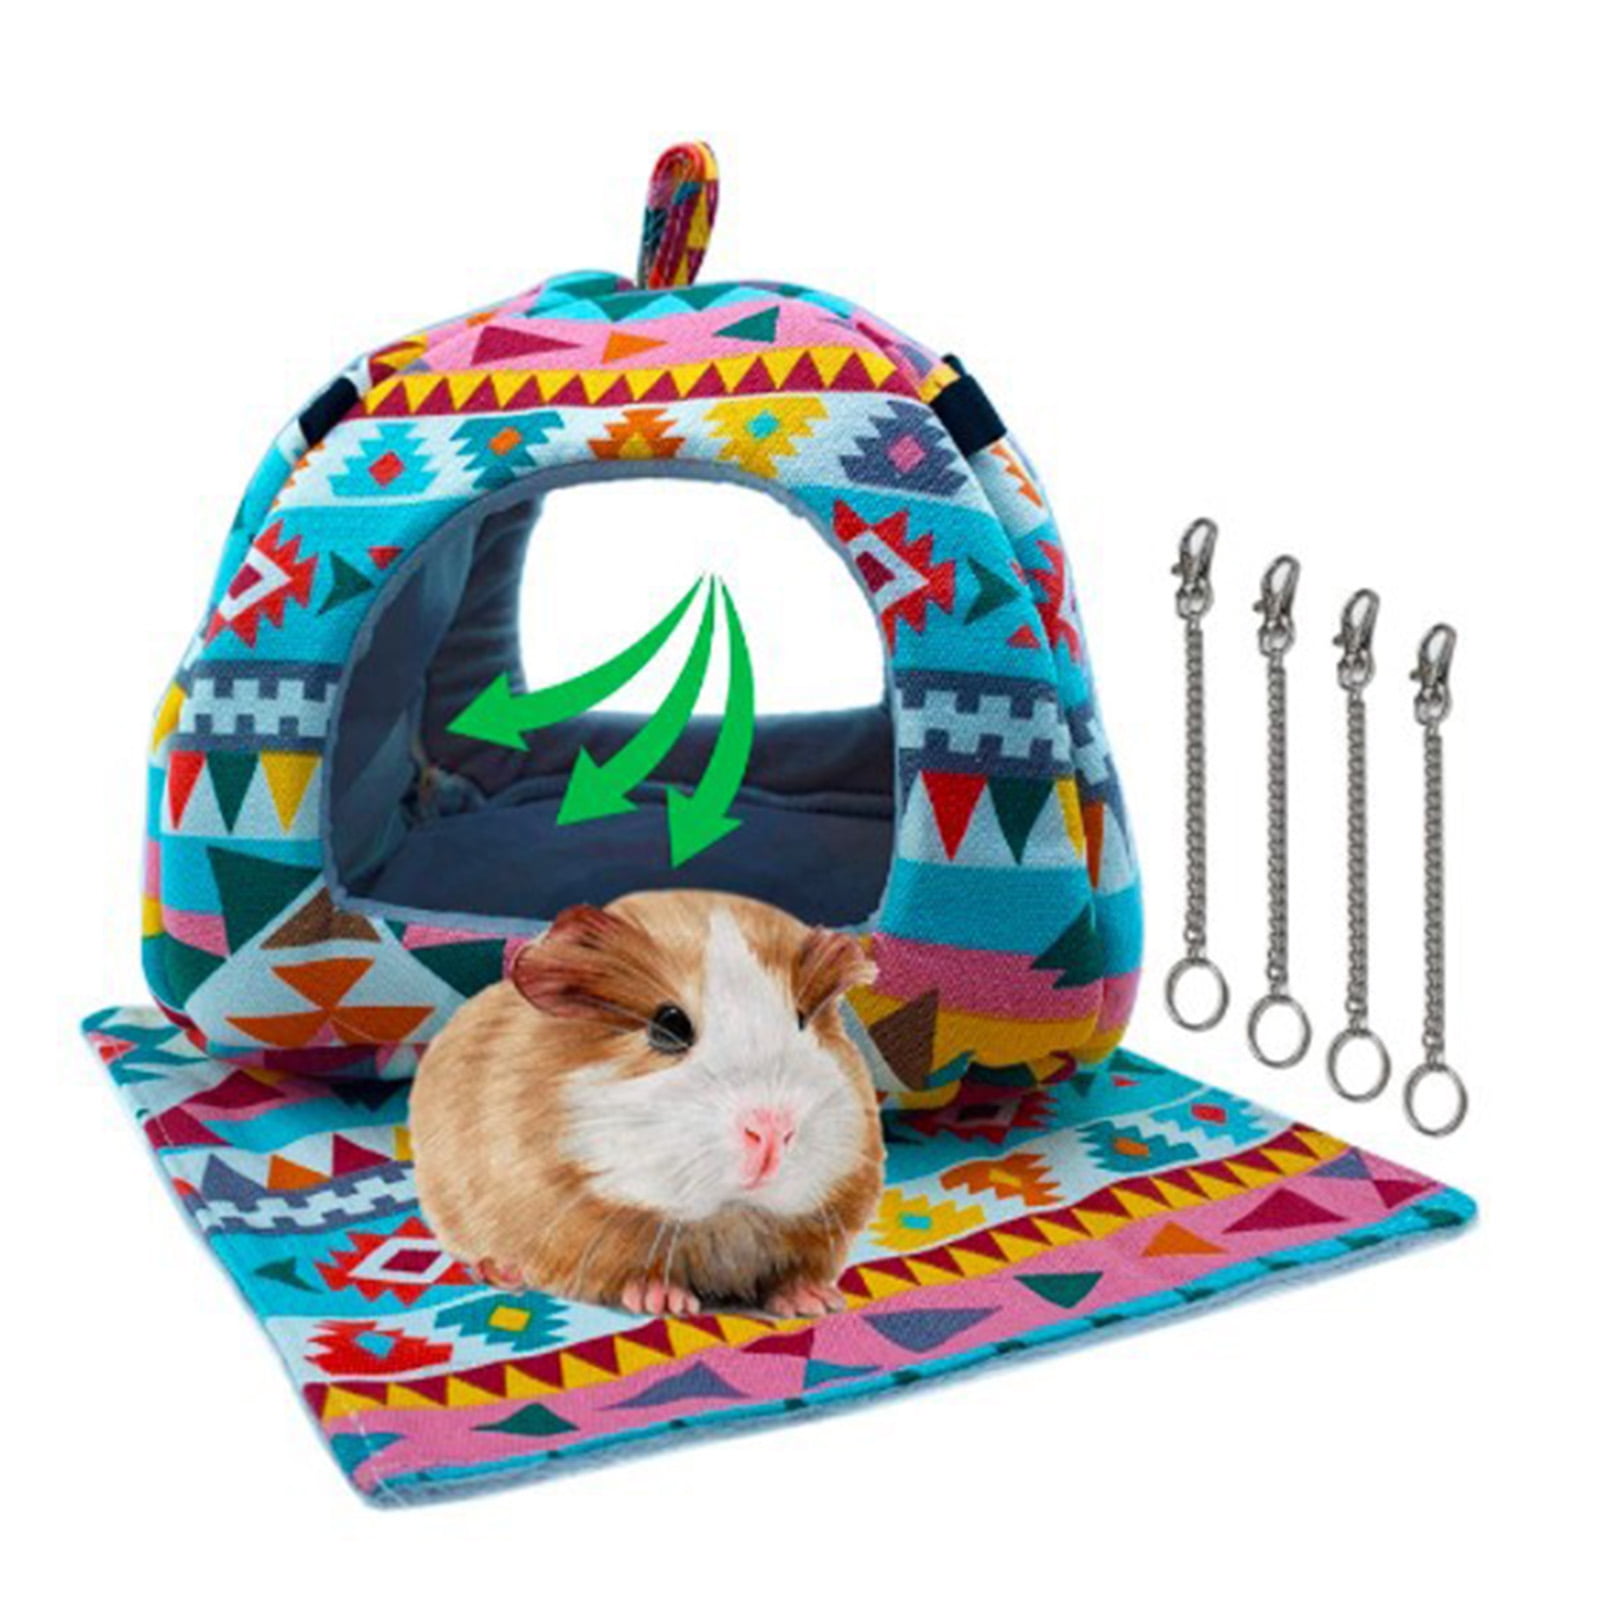 Small Animals Hamster Warm Hammock Hanging Toy Bed House Pet Habitats Cage 